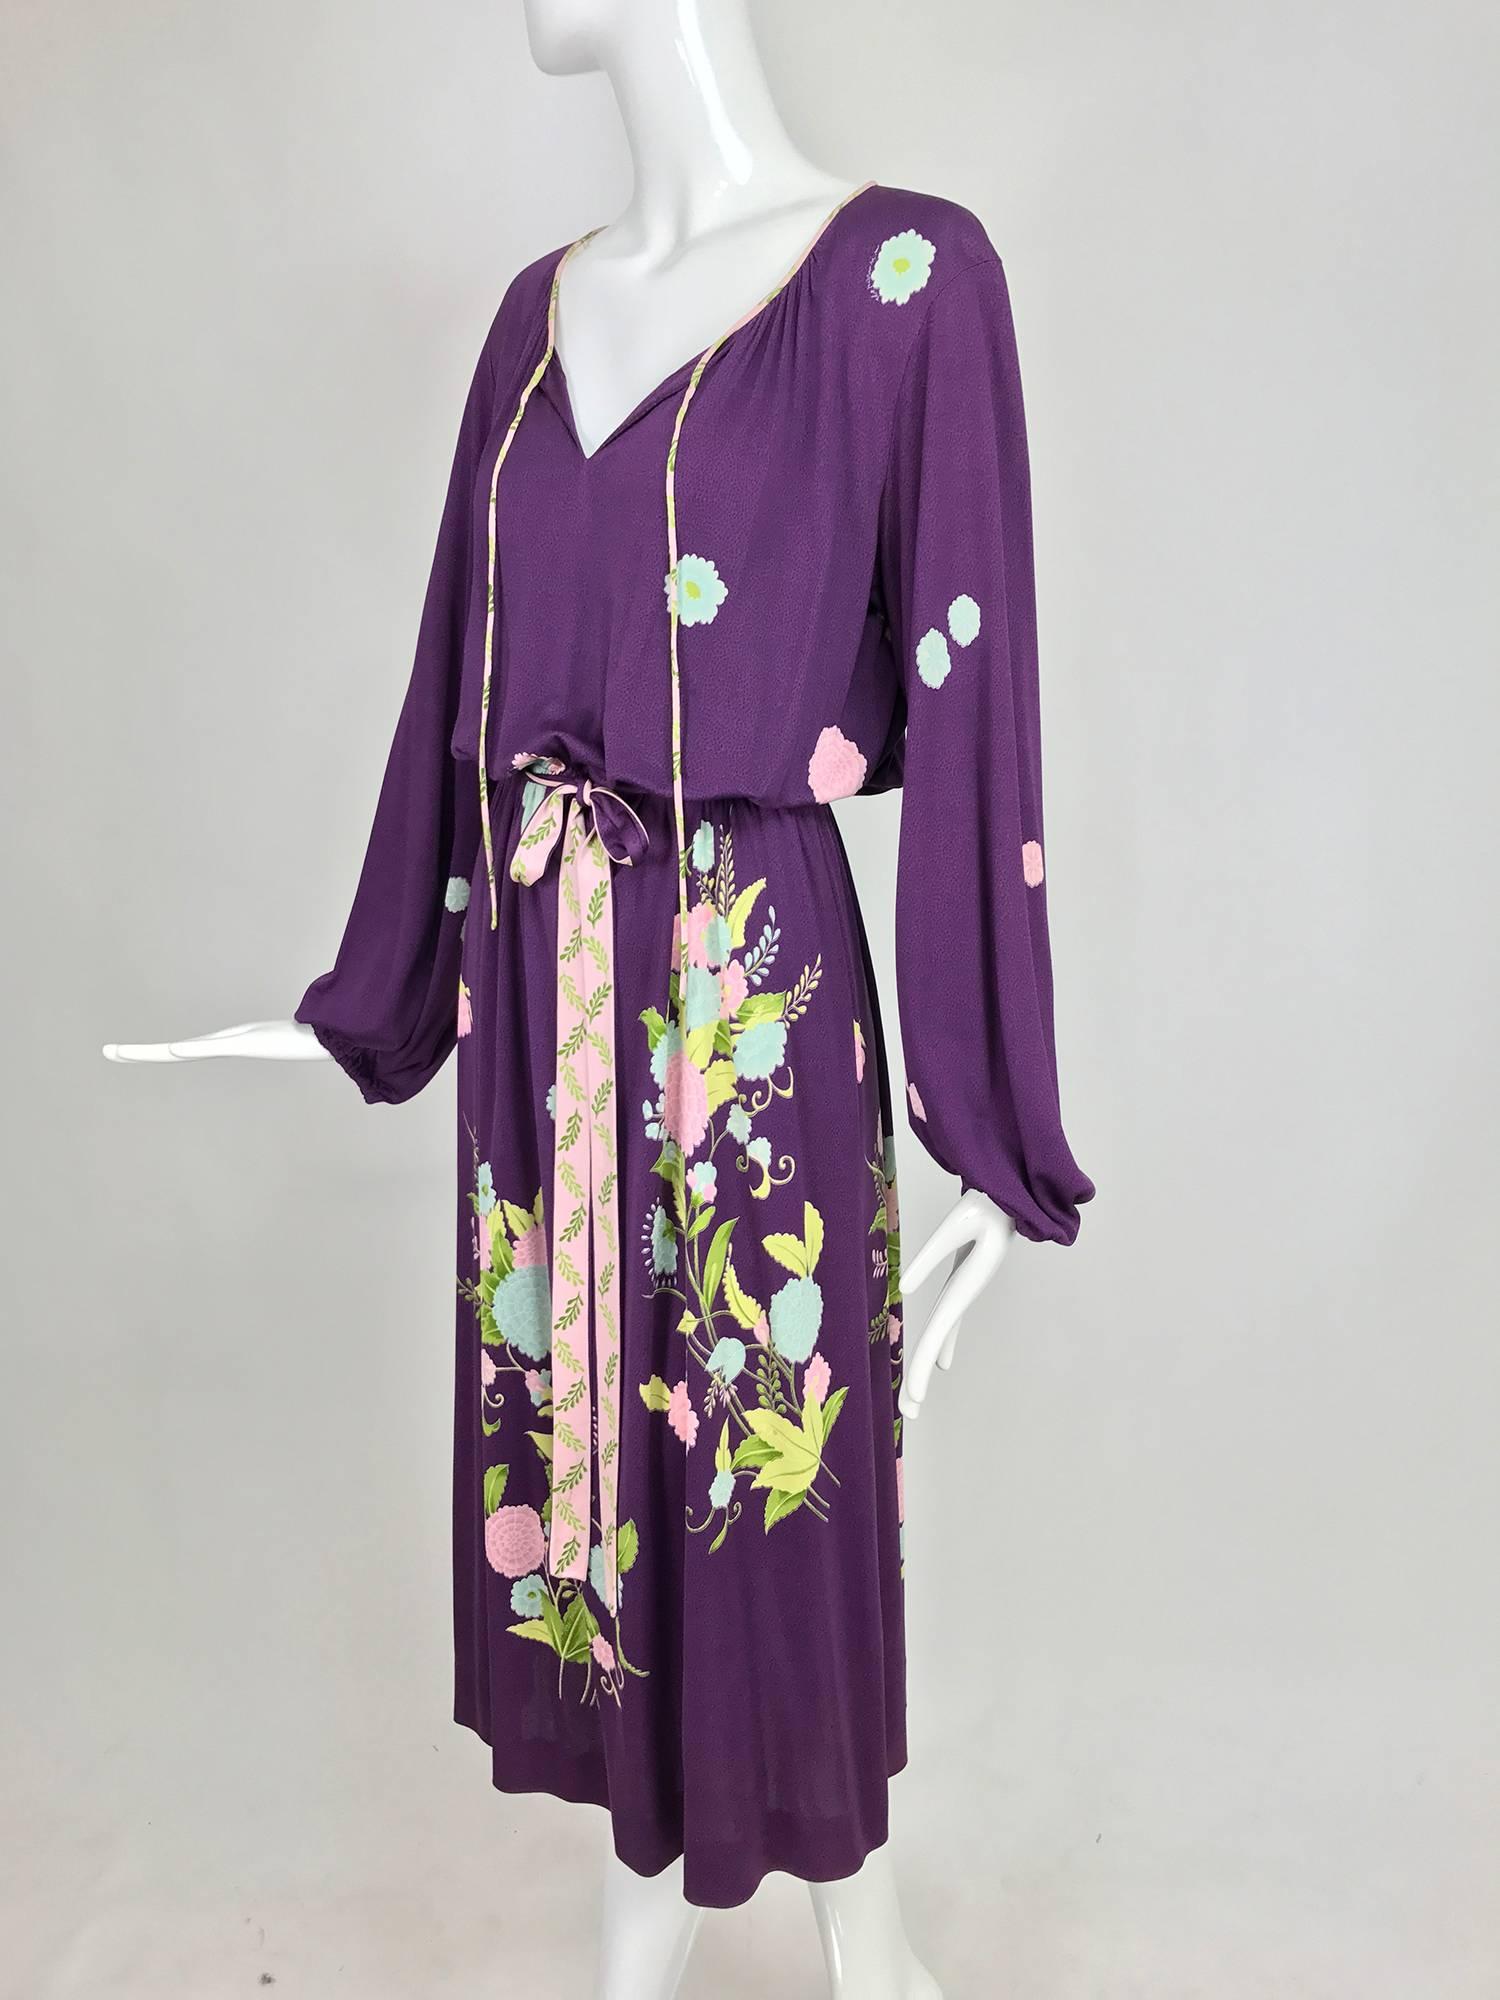 Vintage di Parisini of Santa Margherita aubergine silk print peasant dress early 1970s, designed by Gianni Versace one of his earliest design commissions...This easy to wear dress is fine silk jersey, with a neckline that closes with ties at the